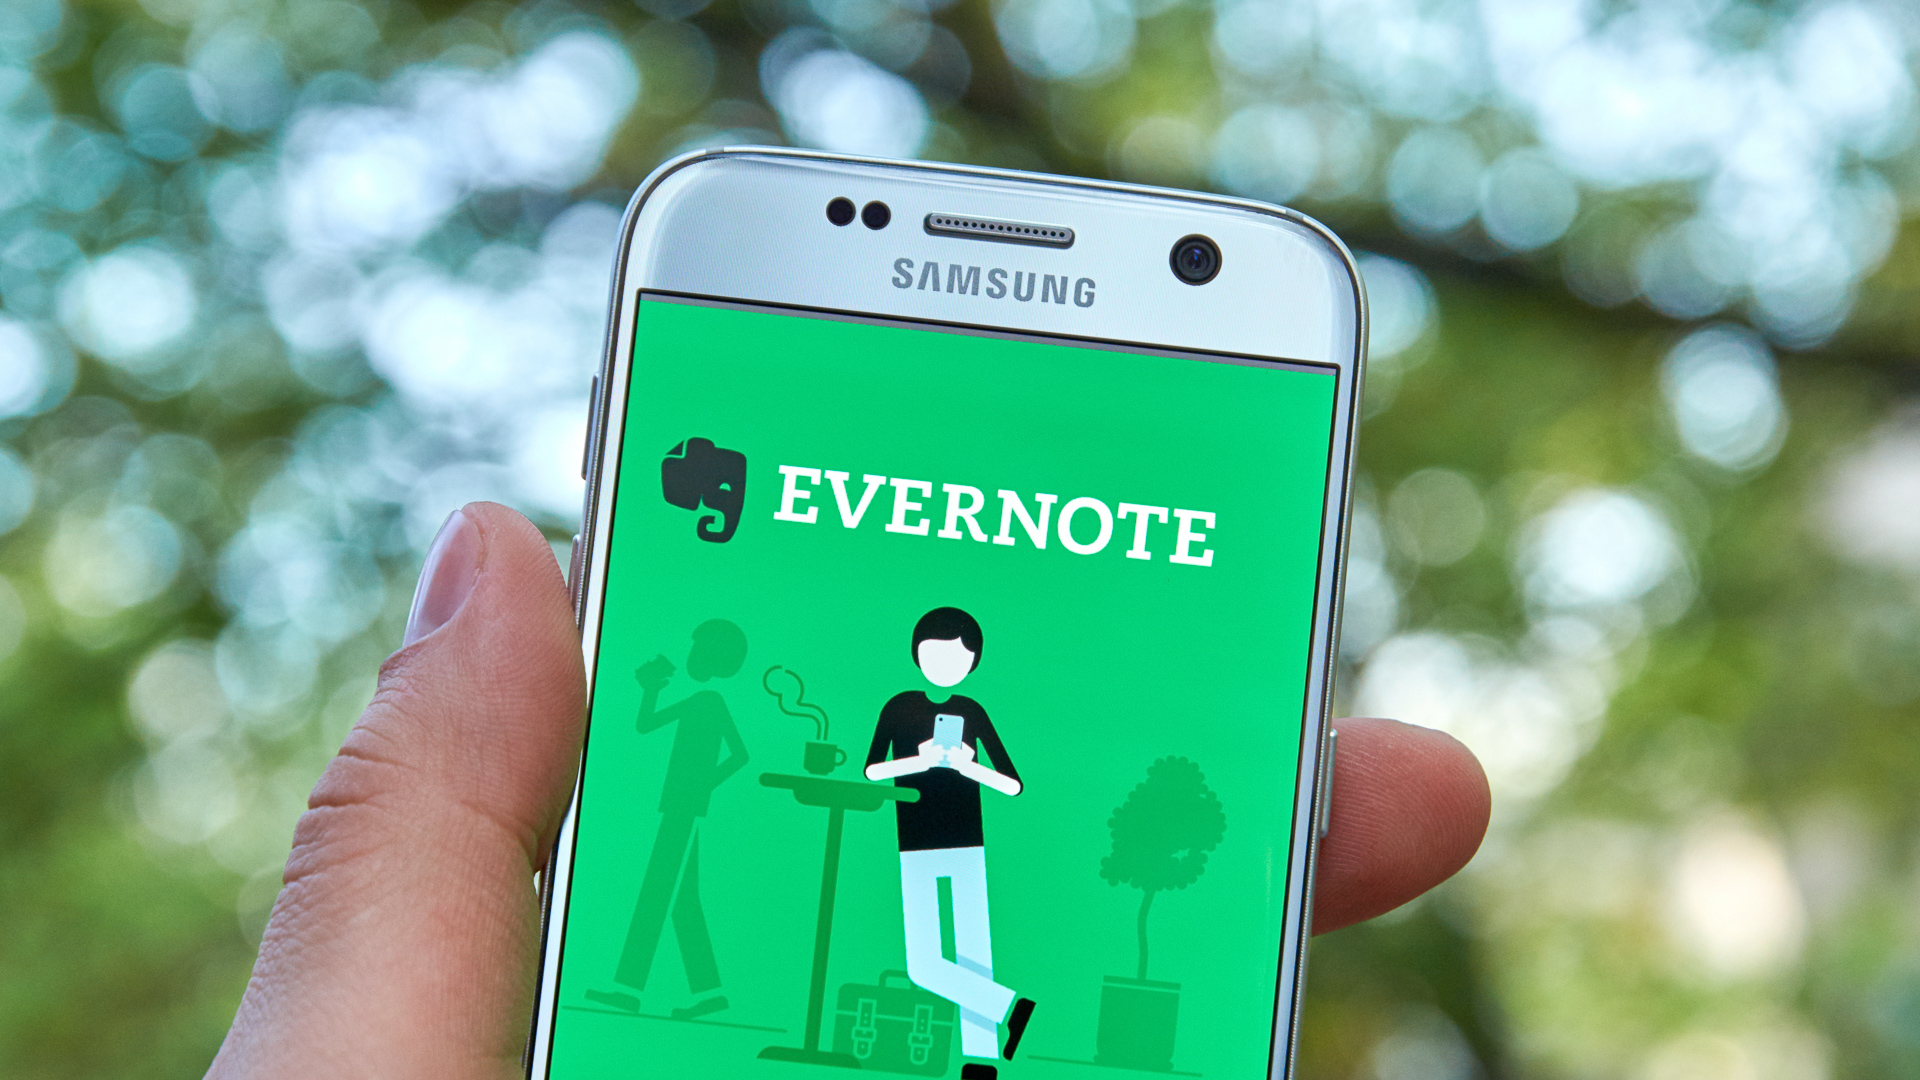 <p>Note-taking app Evernote offers its employees a $1,000 annual vacation stipend to encourage them to take time off to recharge.</p> <p><em><strong>Keep Reading: </strong></em><em><strong><a href="https://www.gobankingrates.com/retirement/planning/best-jobs-to-retire-early/?utm_campaign=1130208&utm_source=msn.com&utm_content=9&utm_medium=rss">30 Best Jobs If You Want To Retire Early</a></strong></em></p>